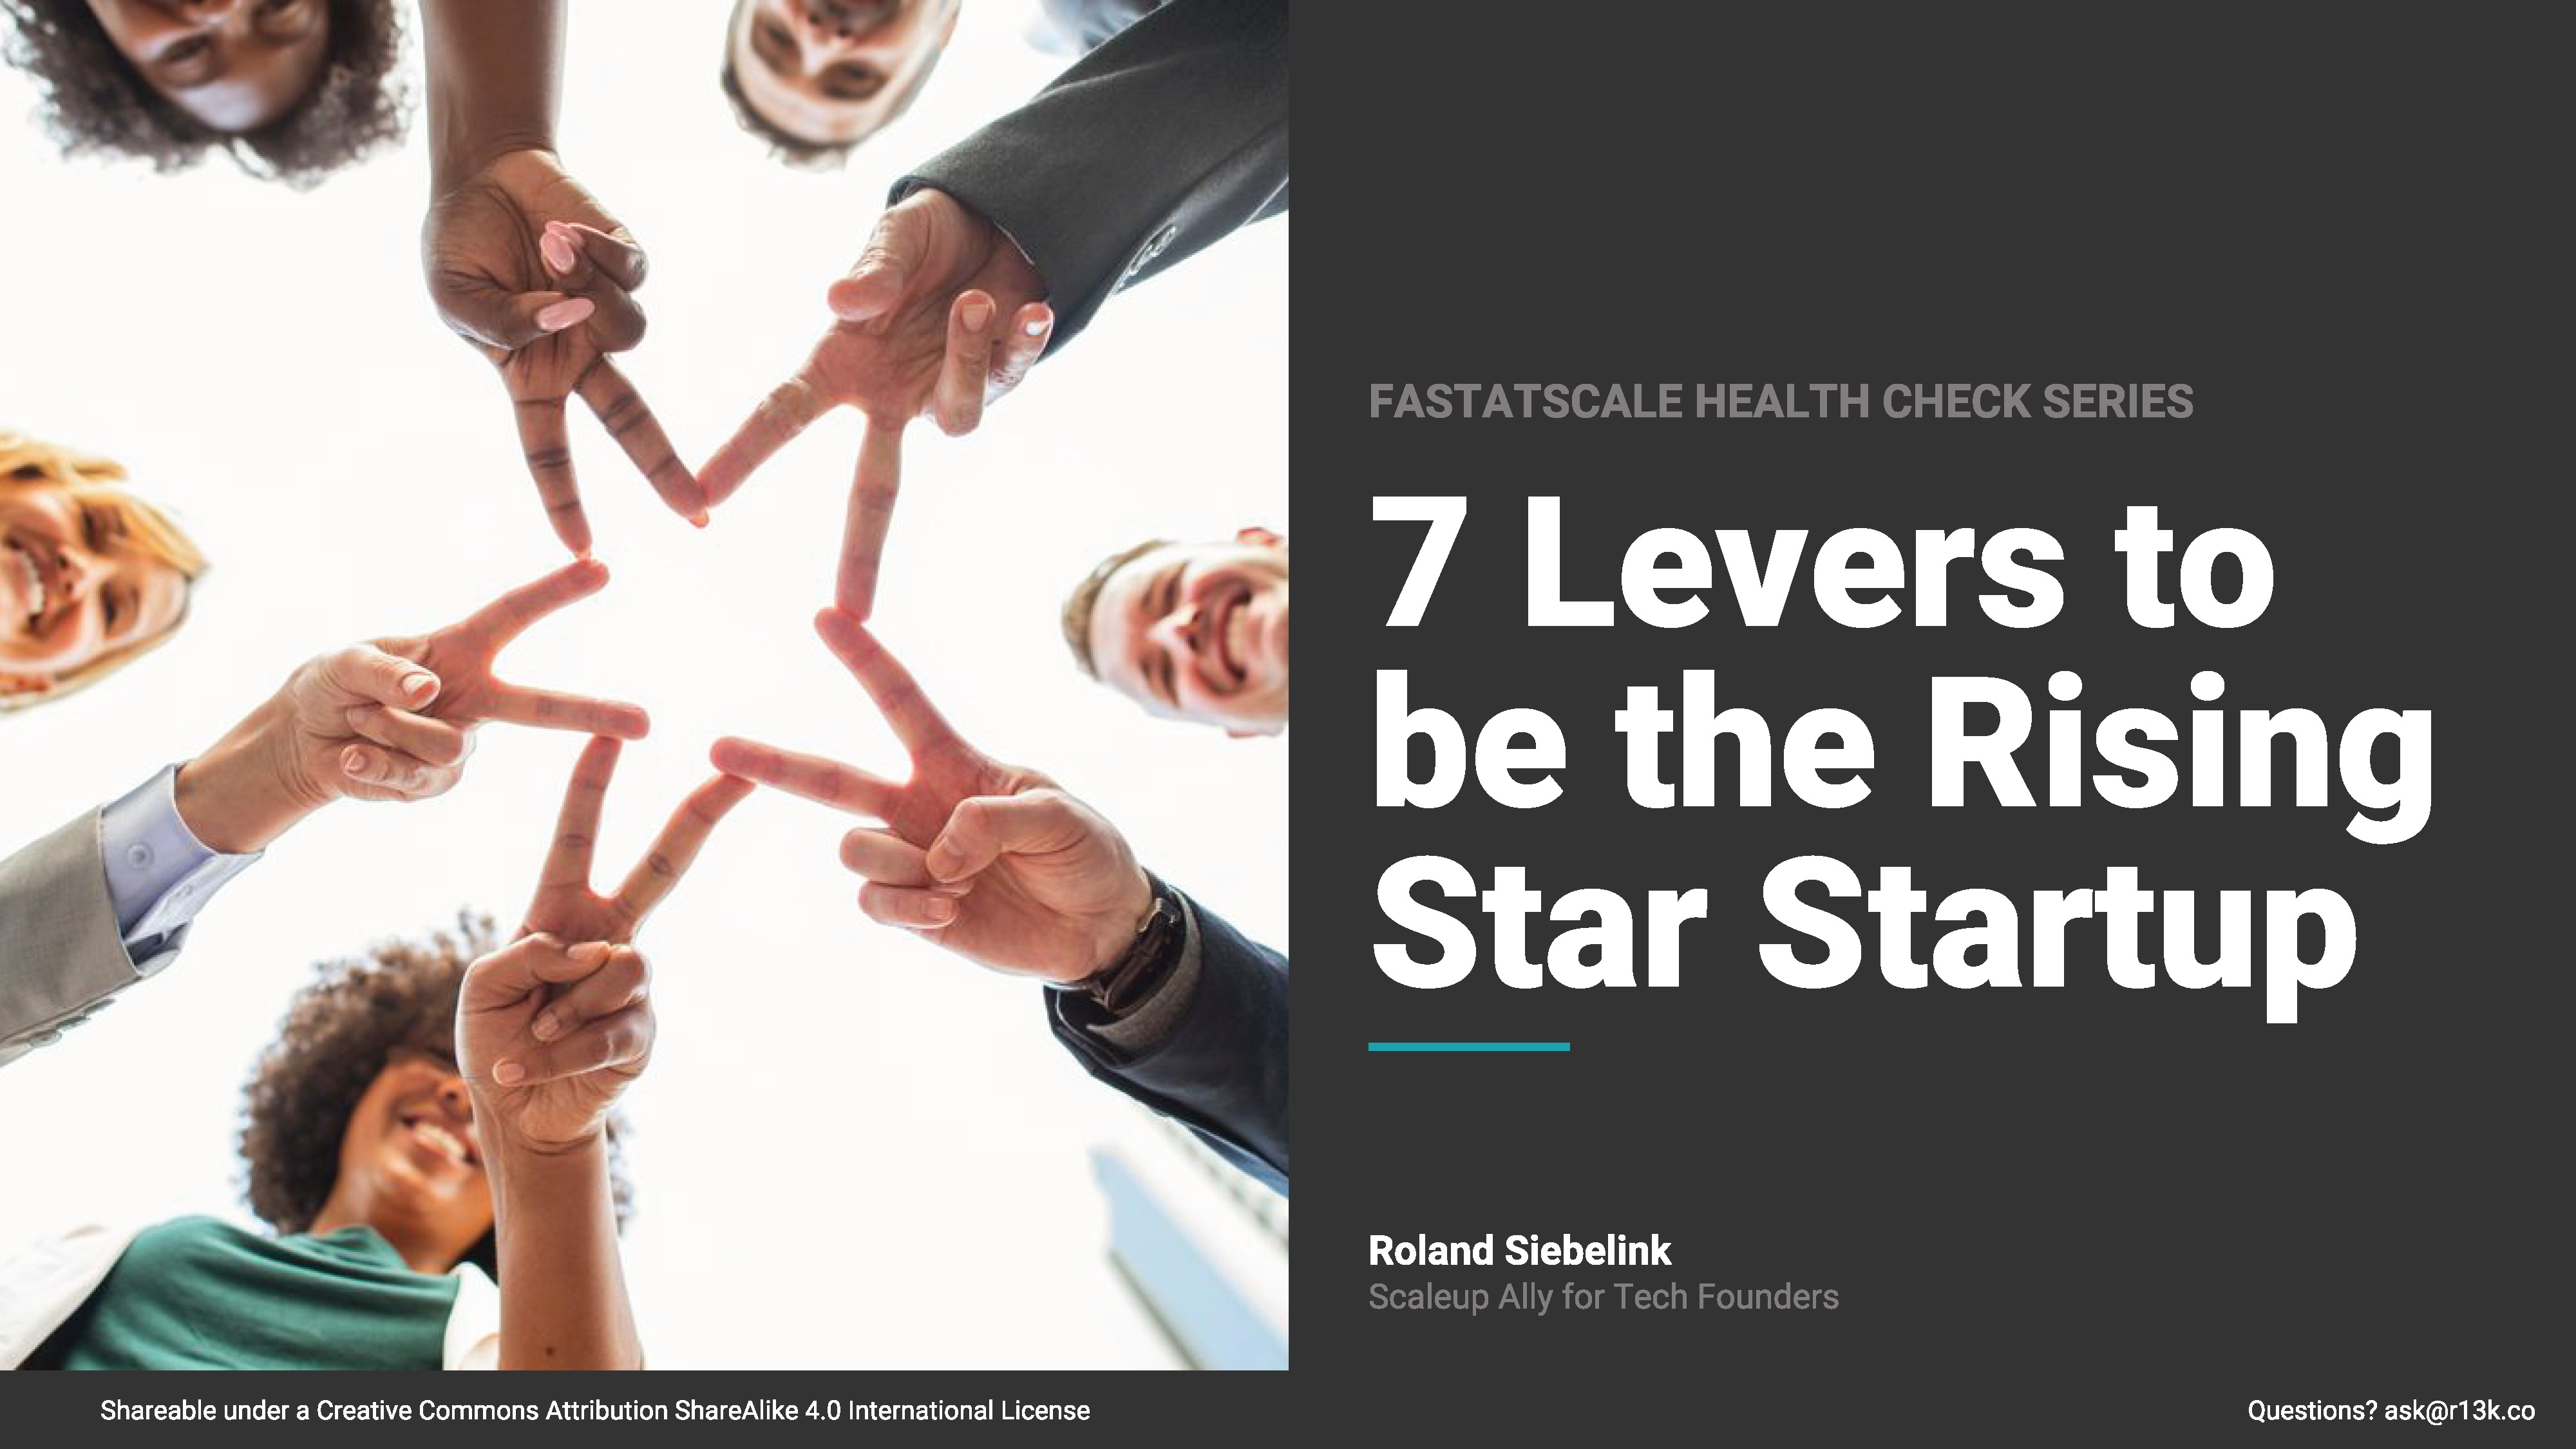 7 Levers to be the Rising Star Startup Fast Track to Stardom: Unveiling the 7 Levers for Startup Success